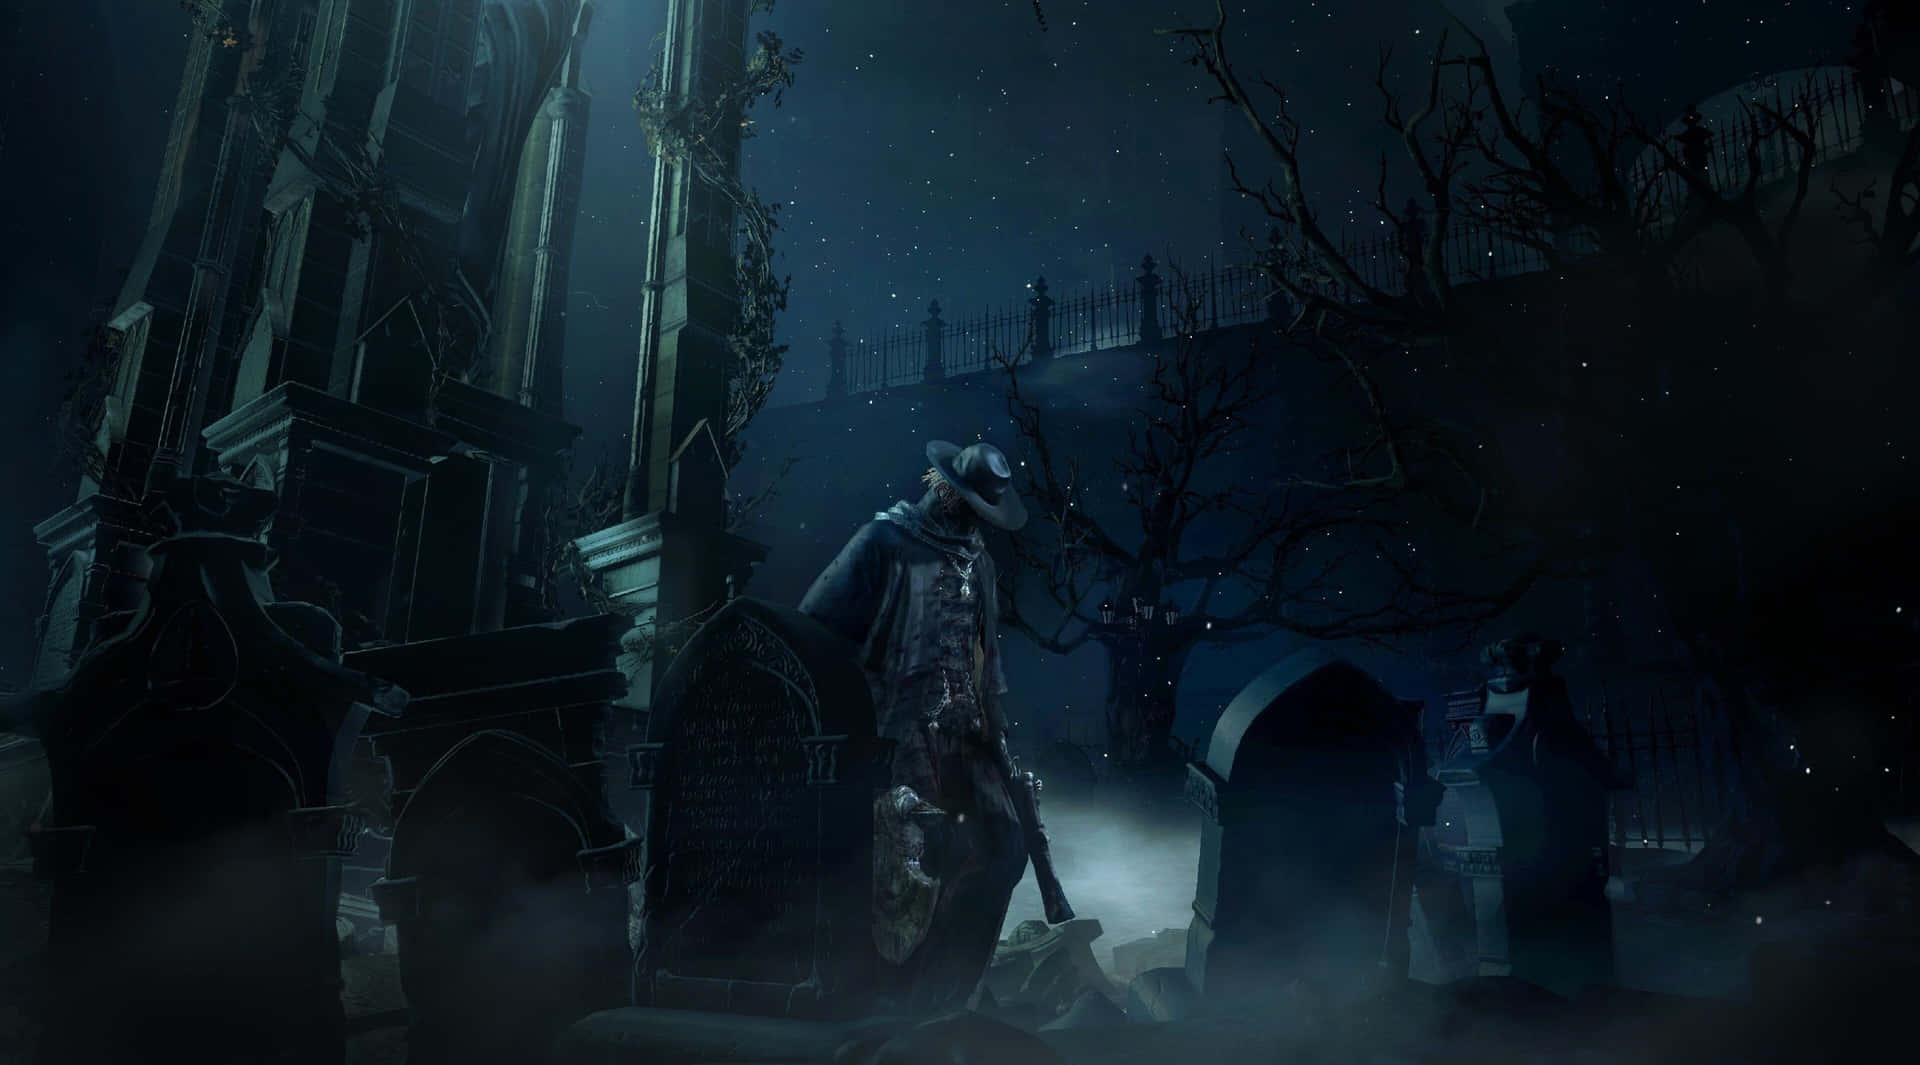 Get lost in the game with stunning 4K visuals of PlayStation 4 exclusive Bloodborne. Wallpaper